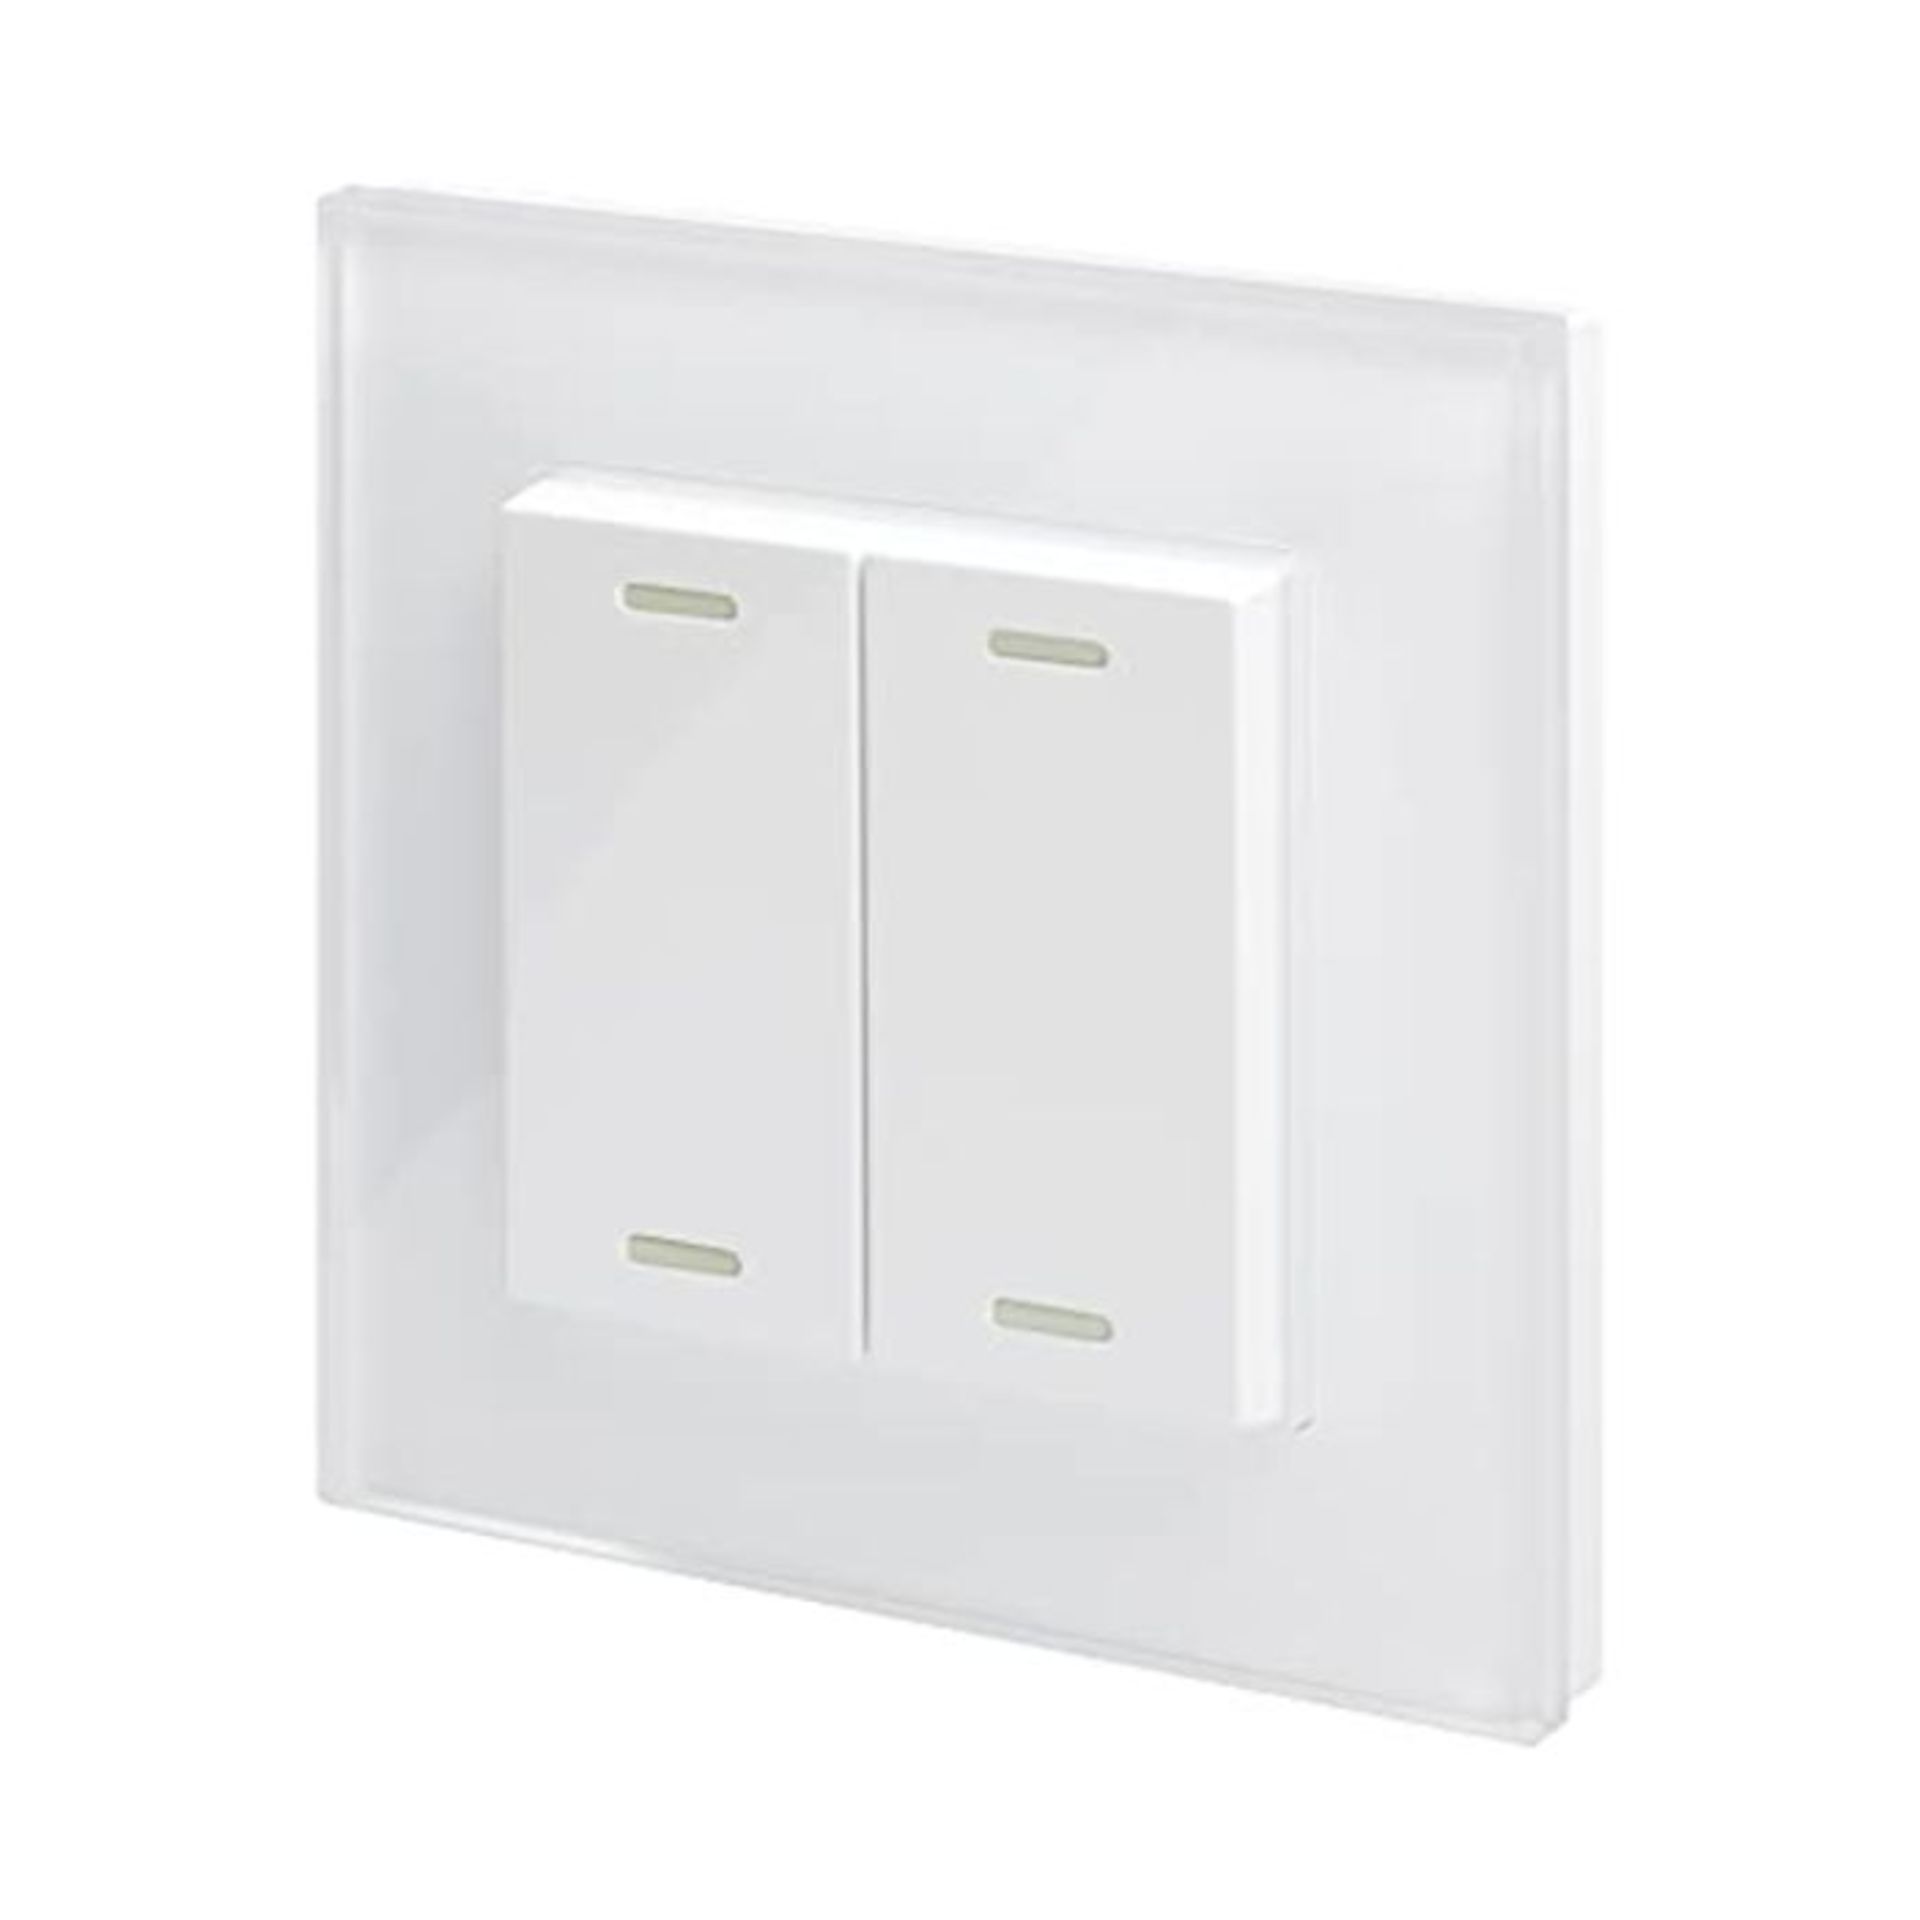 Retrotouch 2802 Friends of Hue Smart Switch - White Plain Glass, 86.0 mm*14.0 mm*86.0